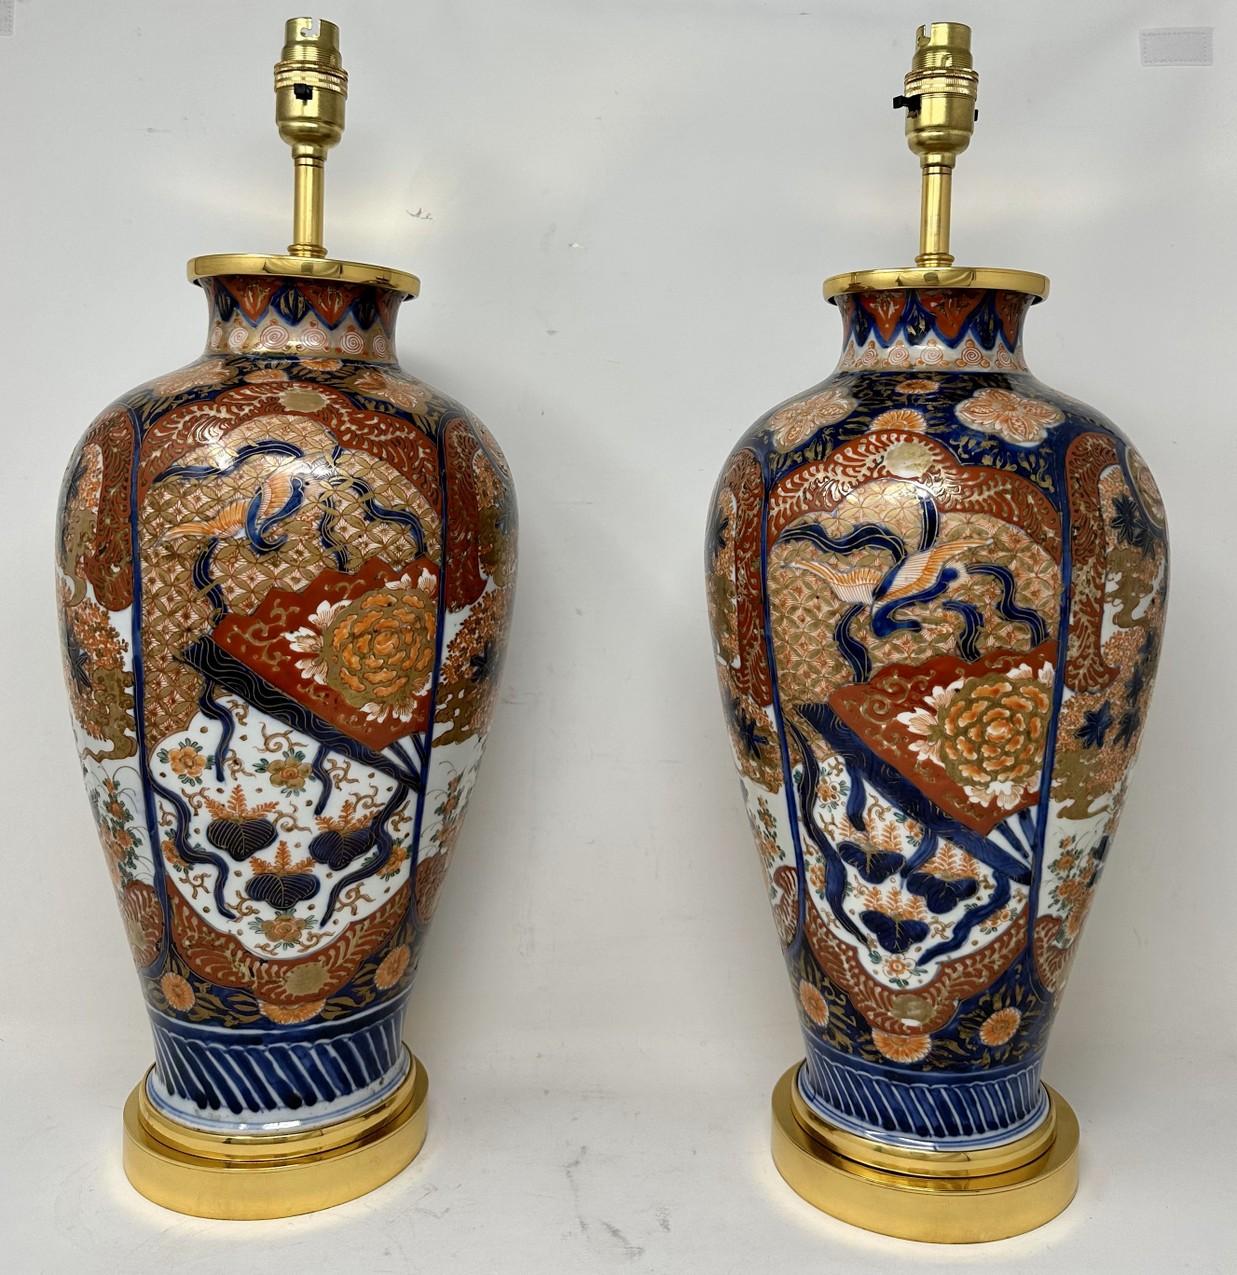 Antique Pair Japanese Chinese Imari Porcelain Ormolu Table Lamps Blue Red Gilt In Good Condition For Sale In Dublin, Ireland